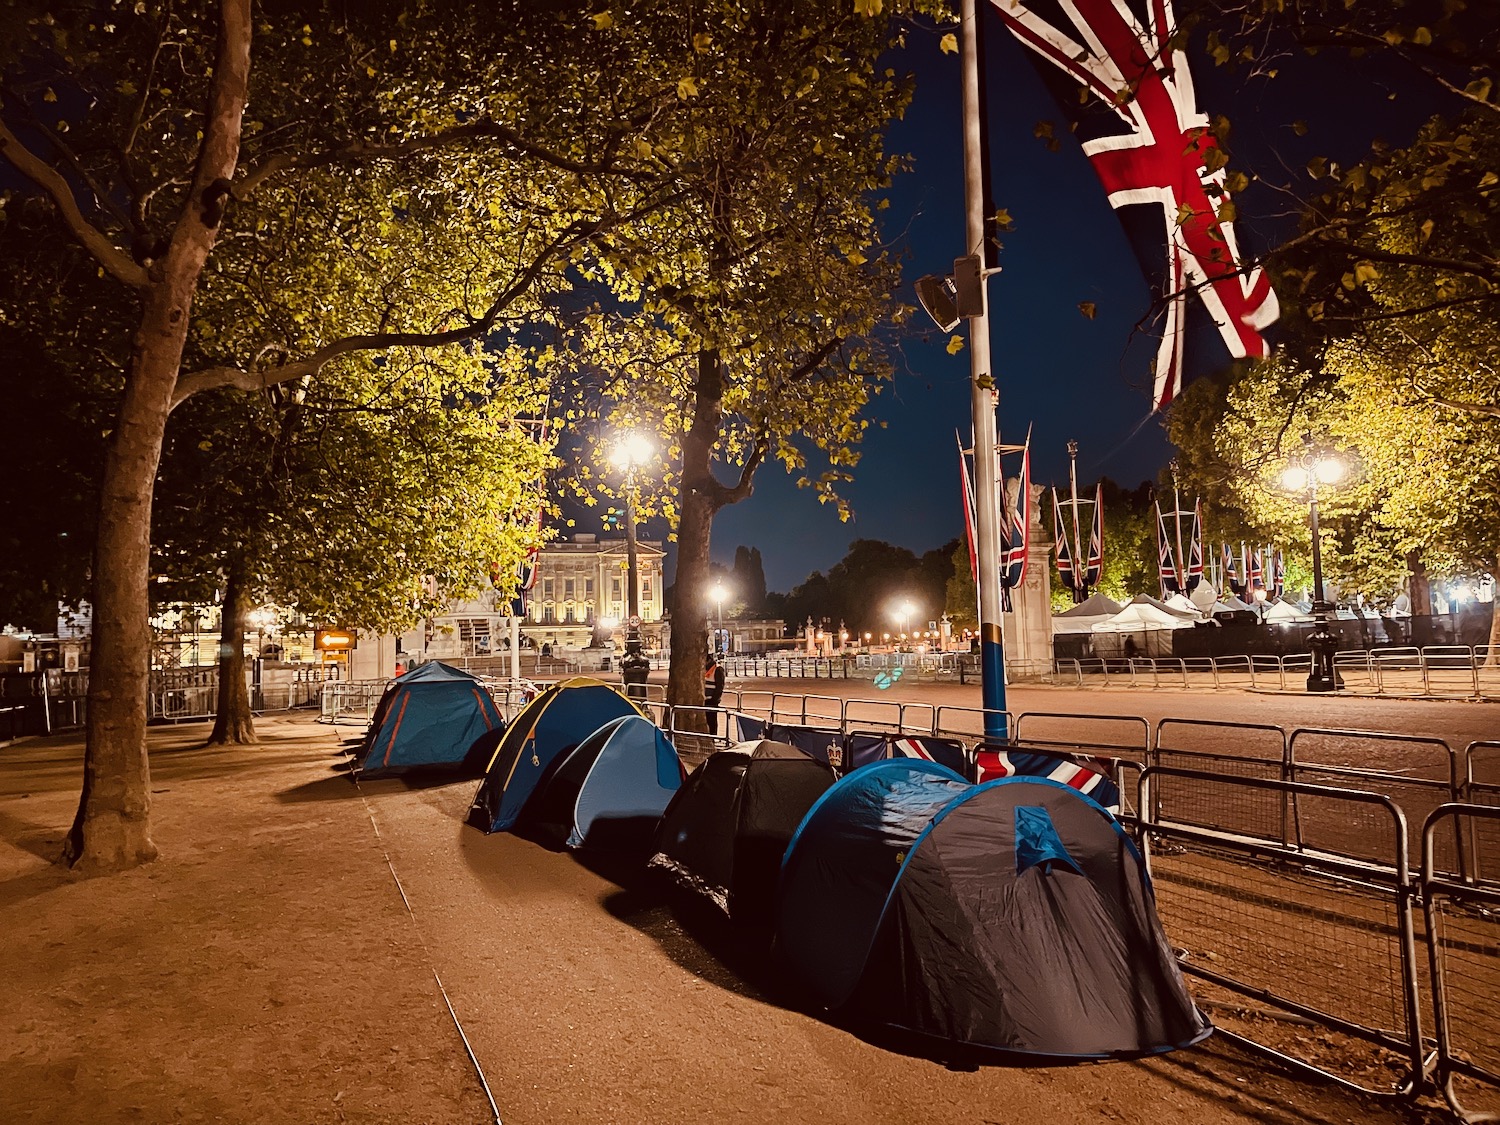 a row of tents on a street